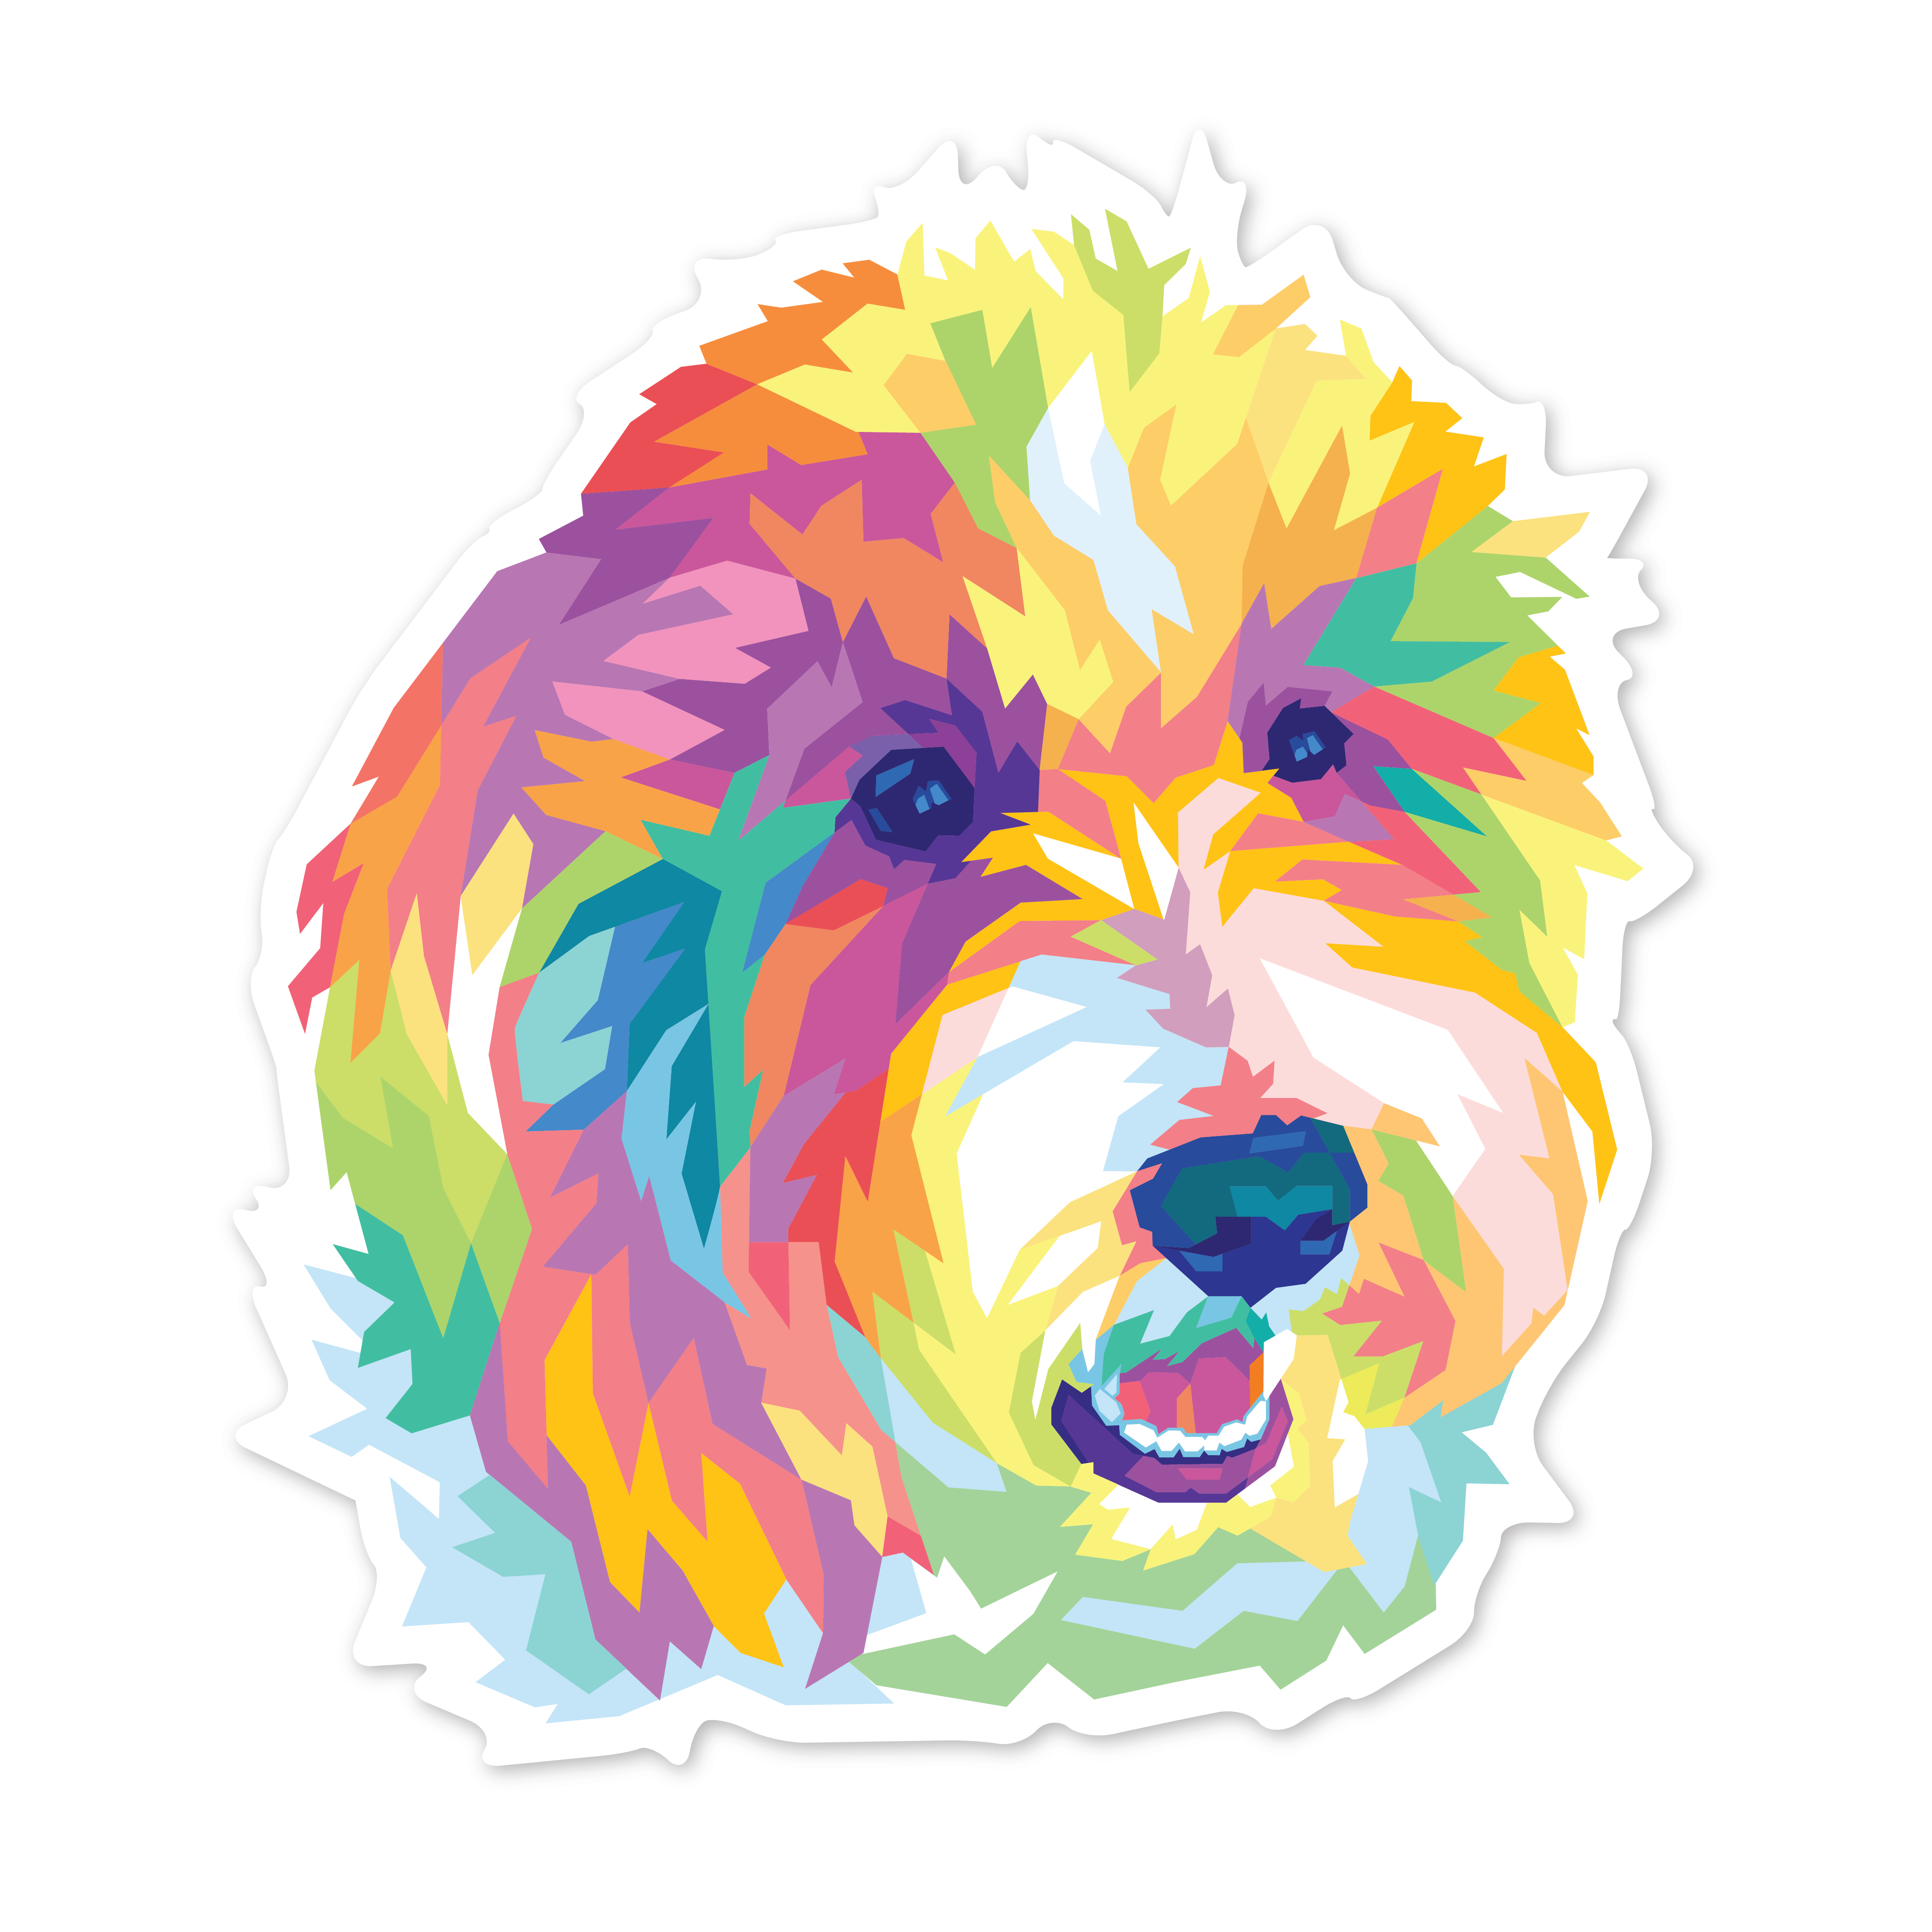 Cute, Labradoodle Dog Stickers, Vinyl Stickers for Water Bottle